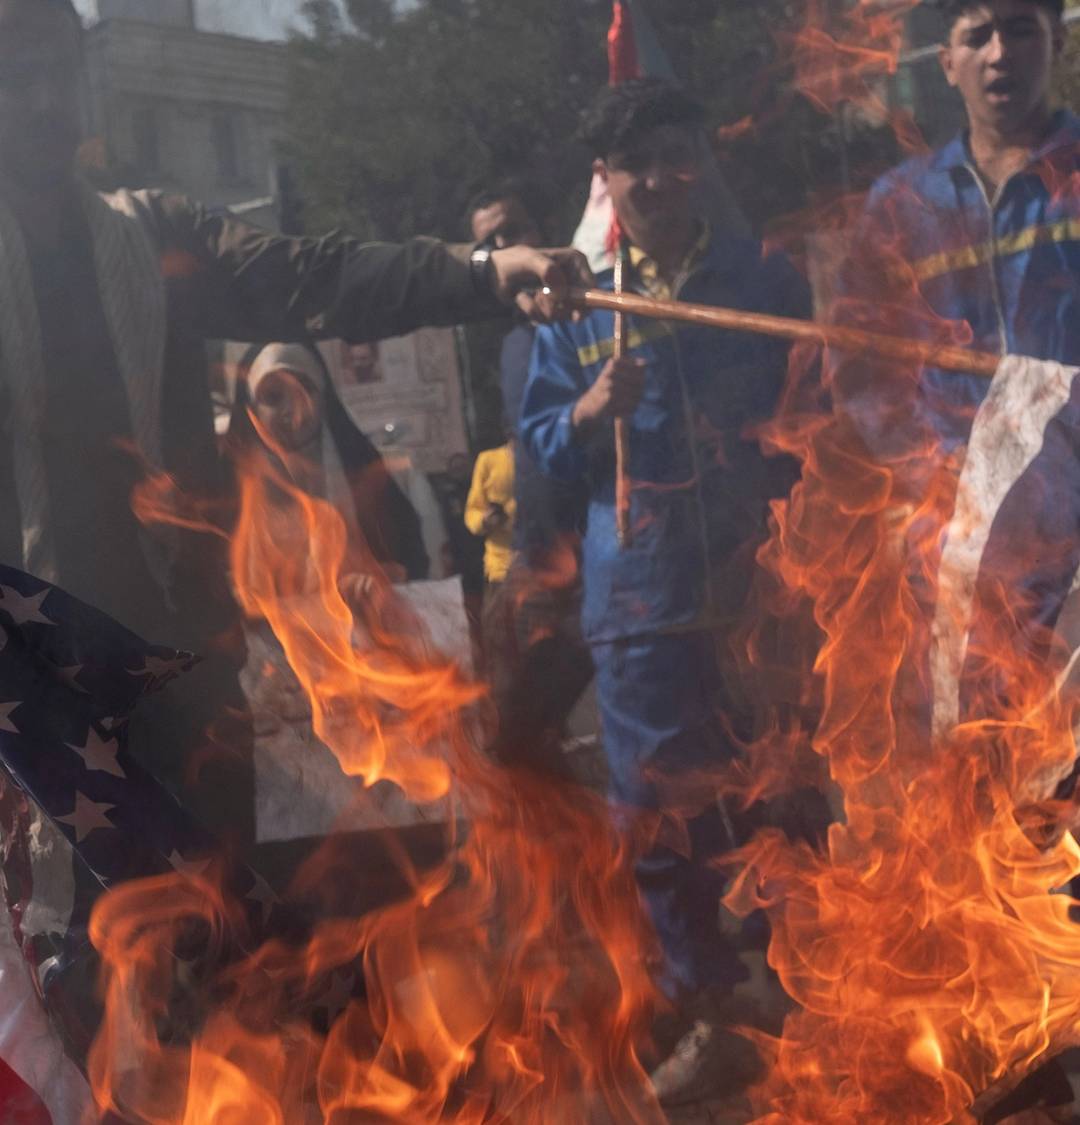 An Iranian protester wearing a military uniform burns the U.S. and Israeli flags during an anti-Israel rally in Tehran on Oct. 20, 2023